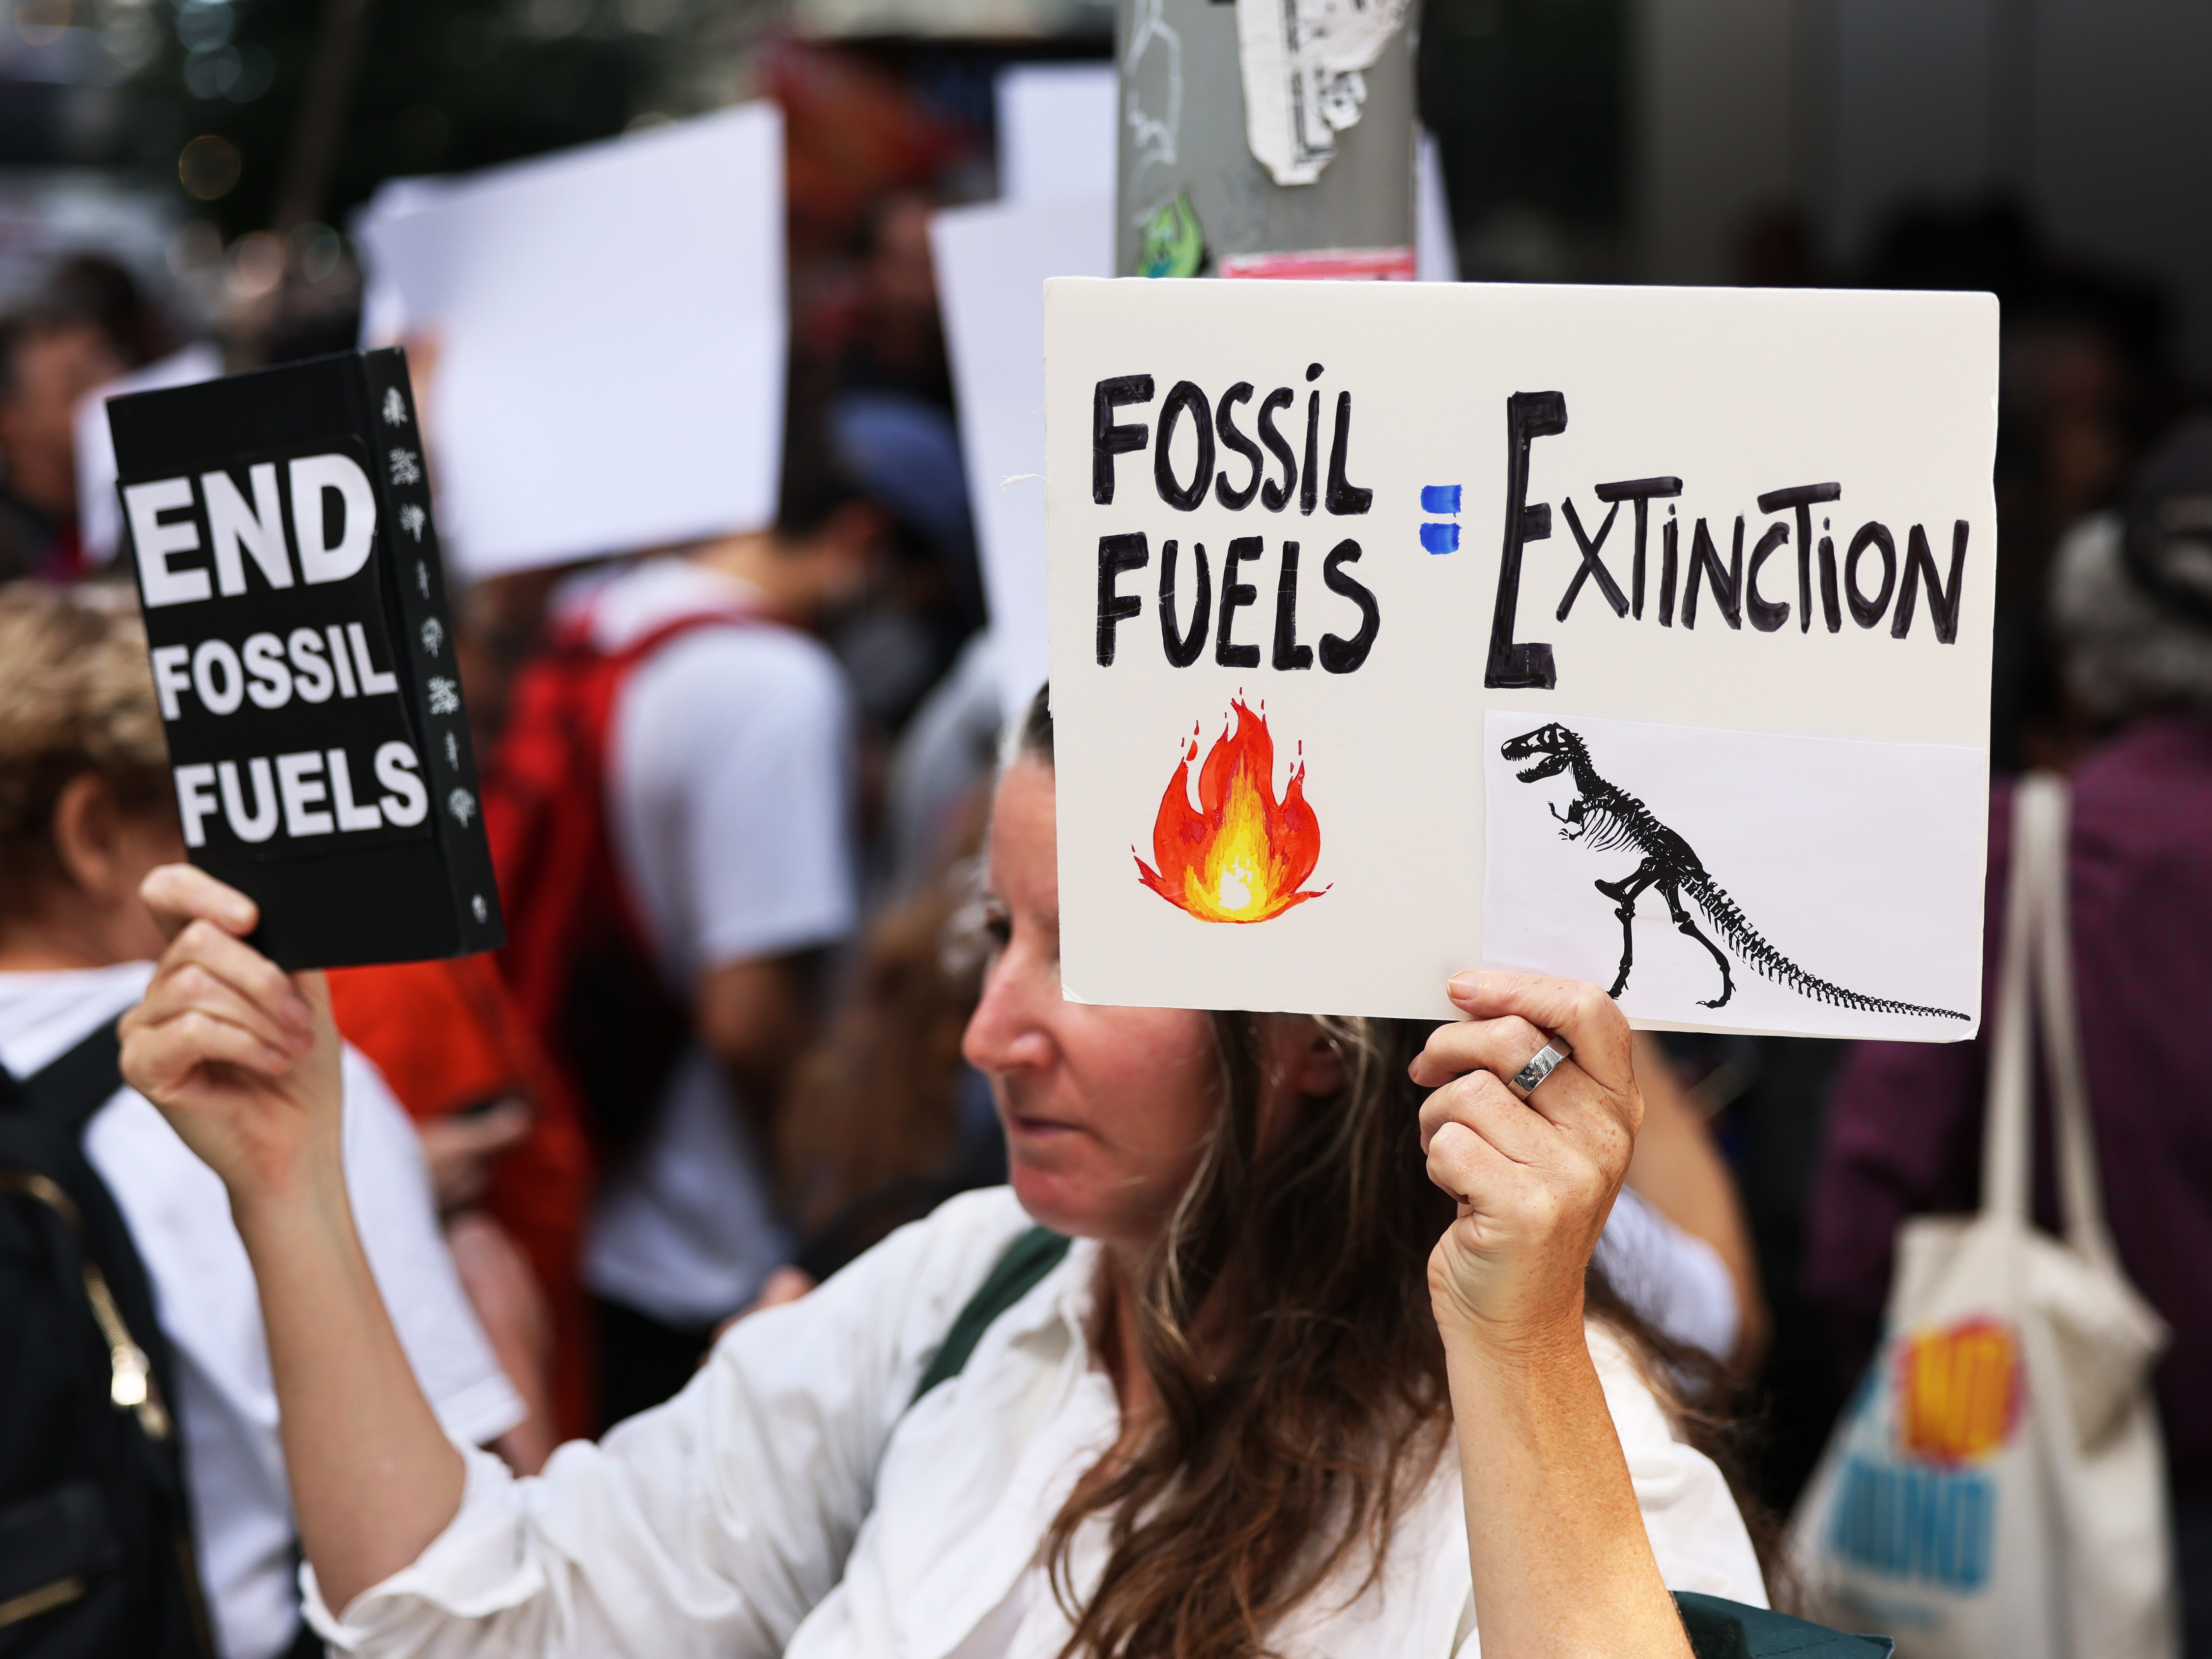 Thousands expected to march in New York to demand that Biden end fossil fuels